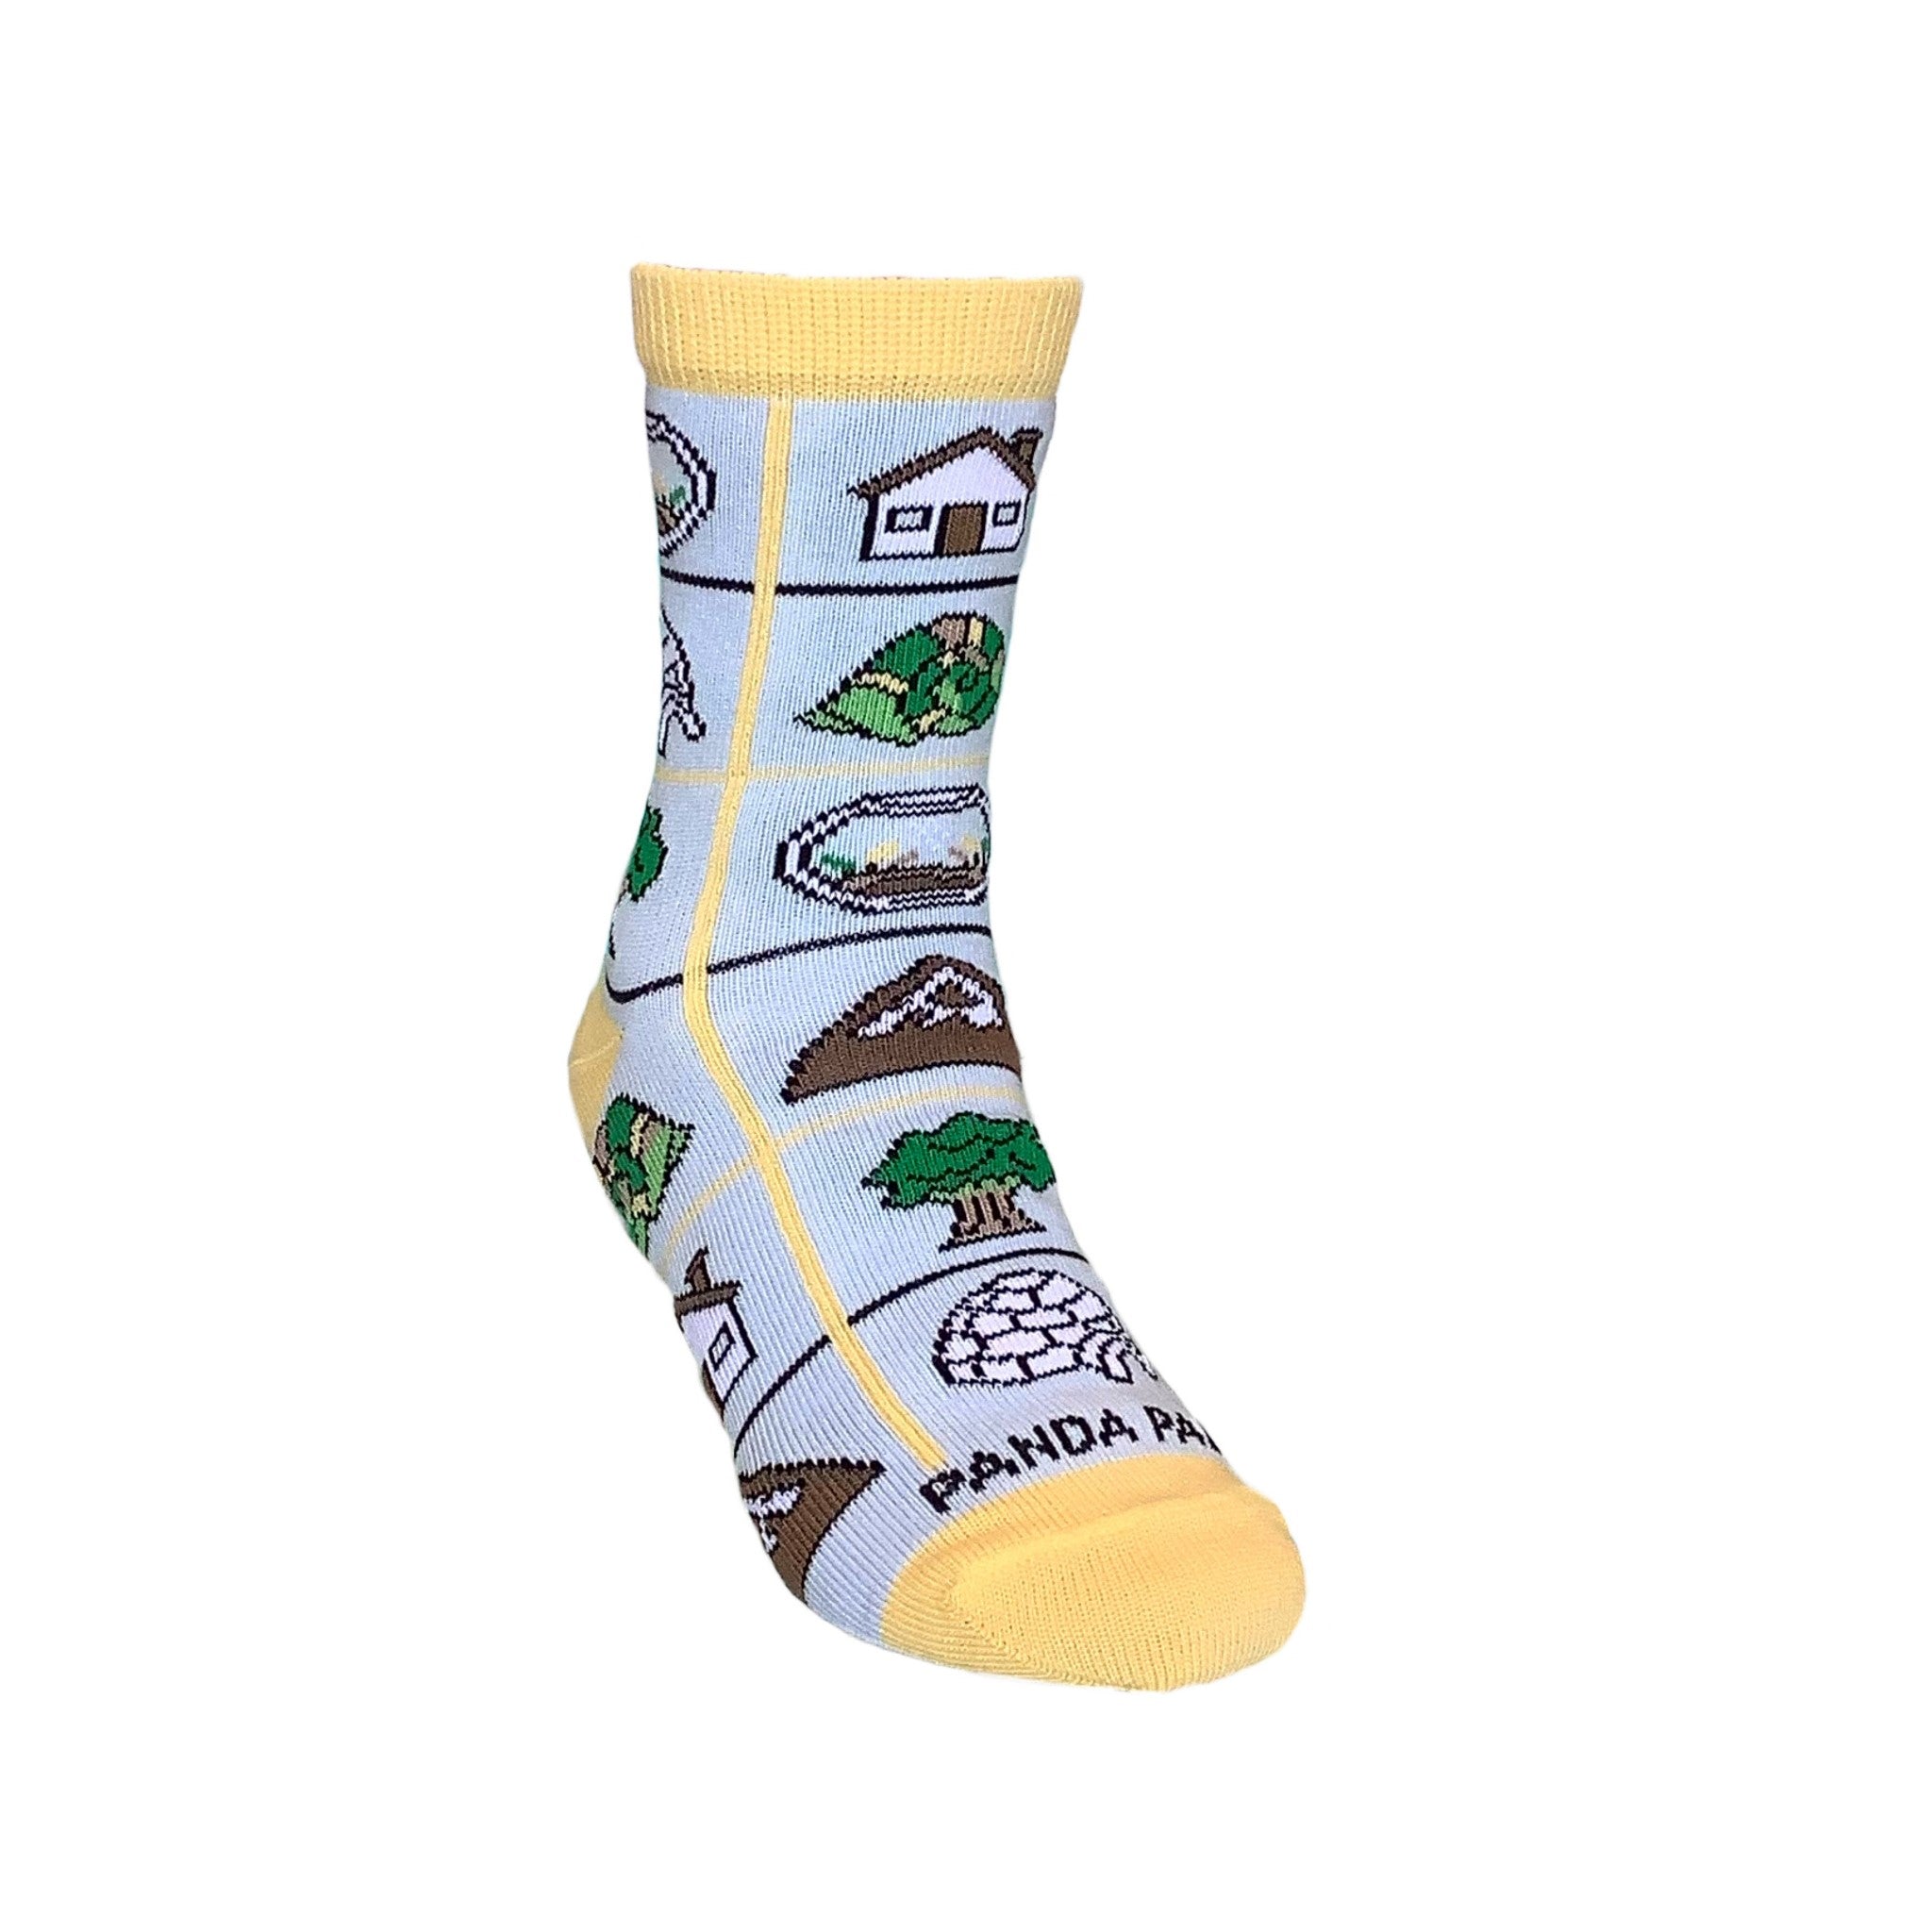 Home Sweet Home Socks (Ages 3-7)